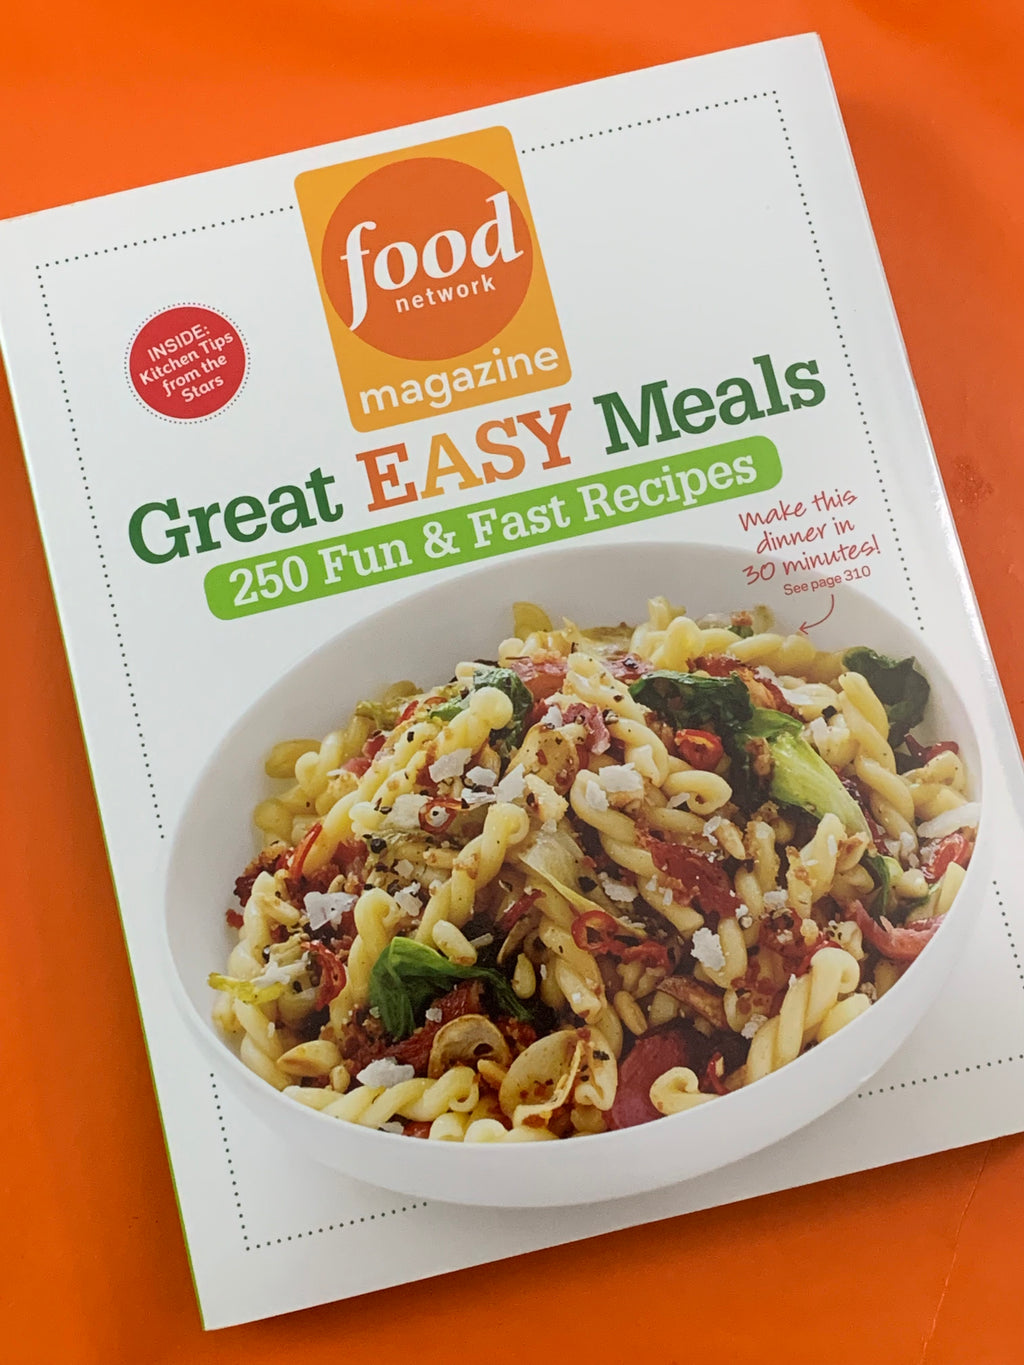 Great Easy Meals: 250 Fun & Fast Recipes- By Food Network Magazine